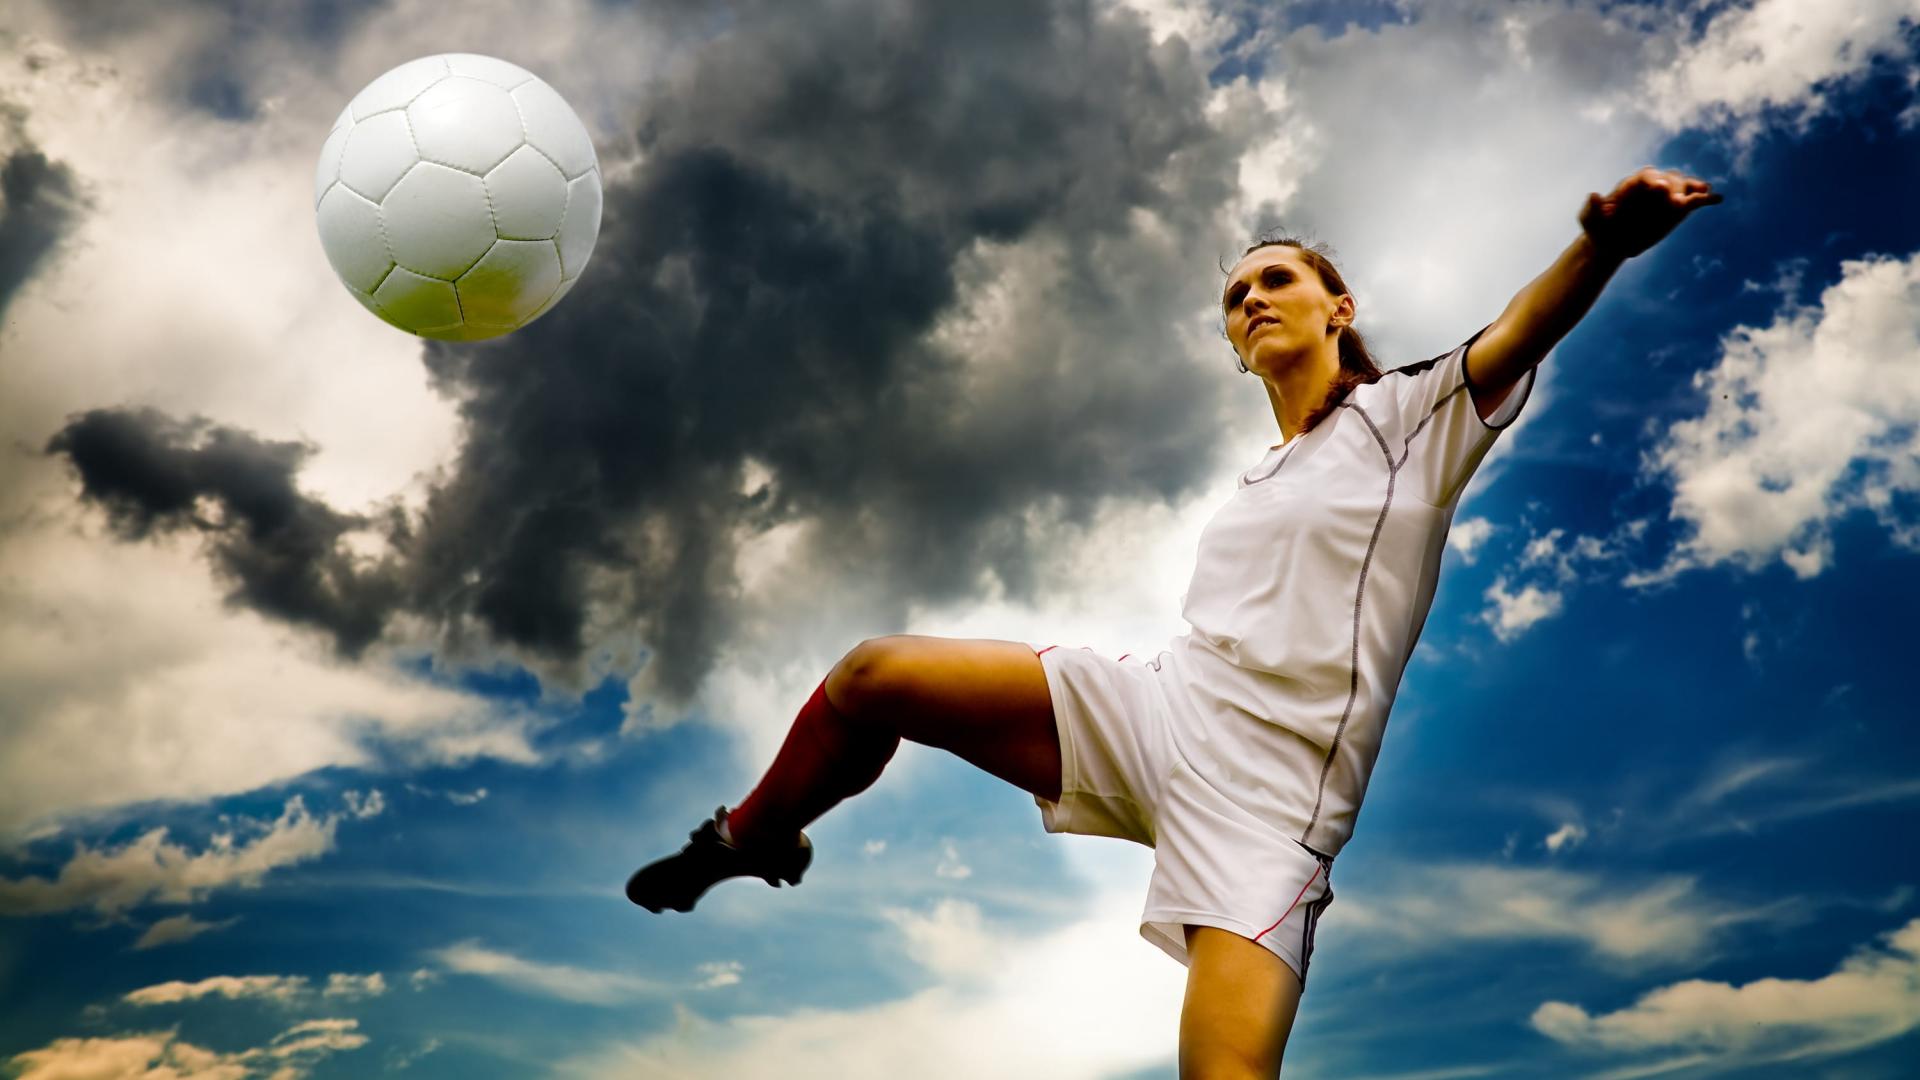 Female soccer player volleying a ball, showing great touch